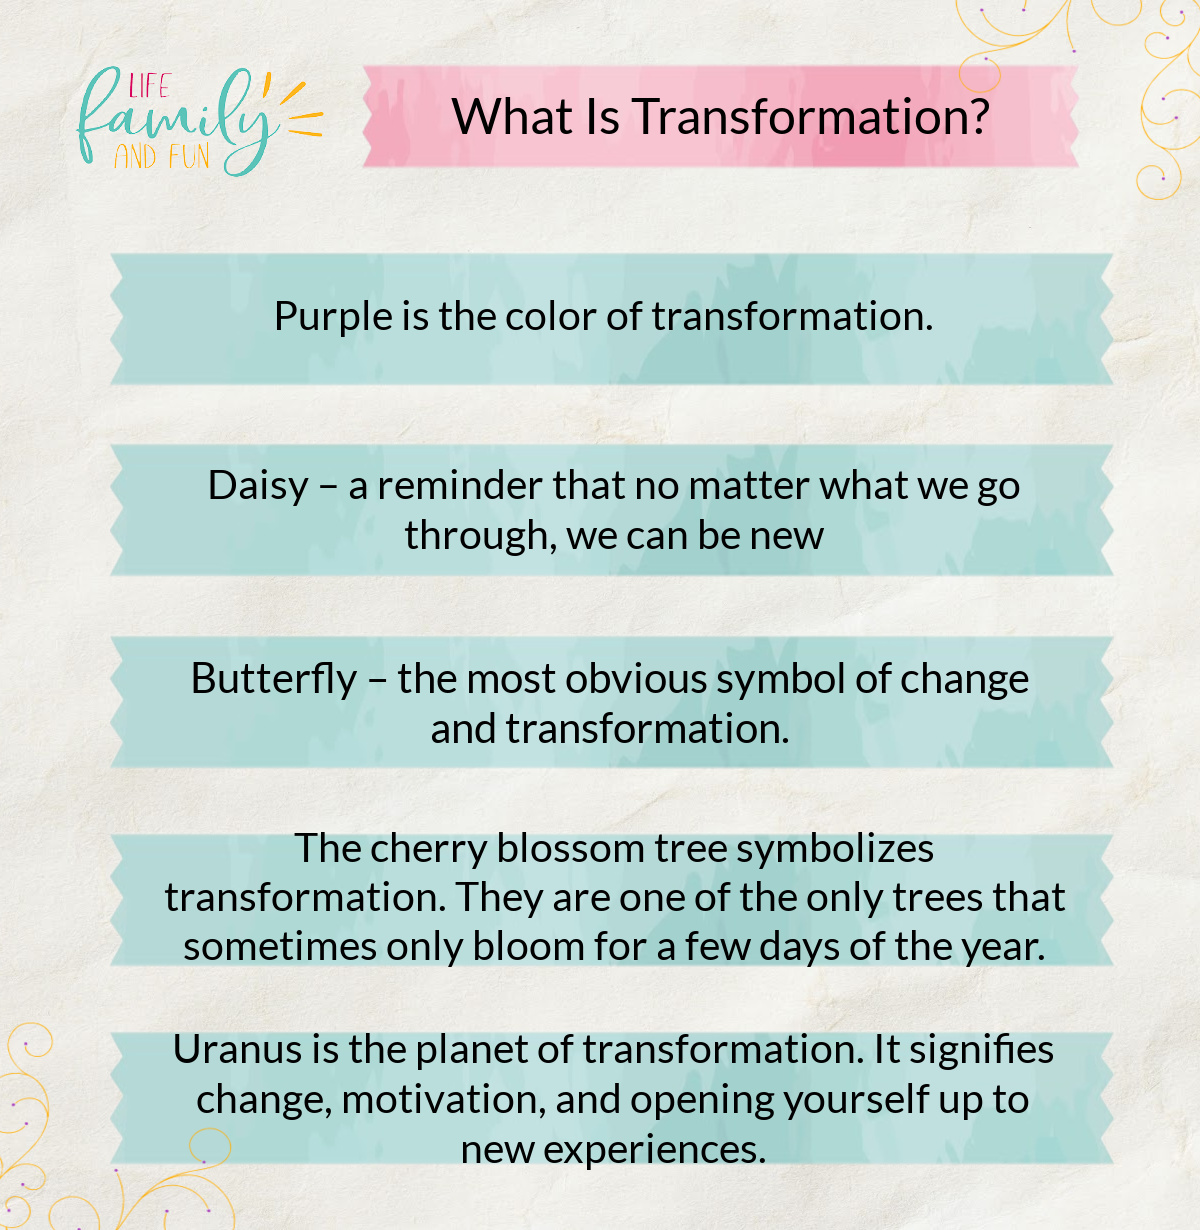 What Is Transformation?